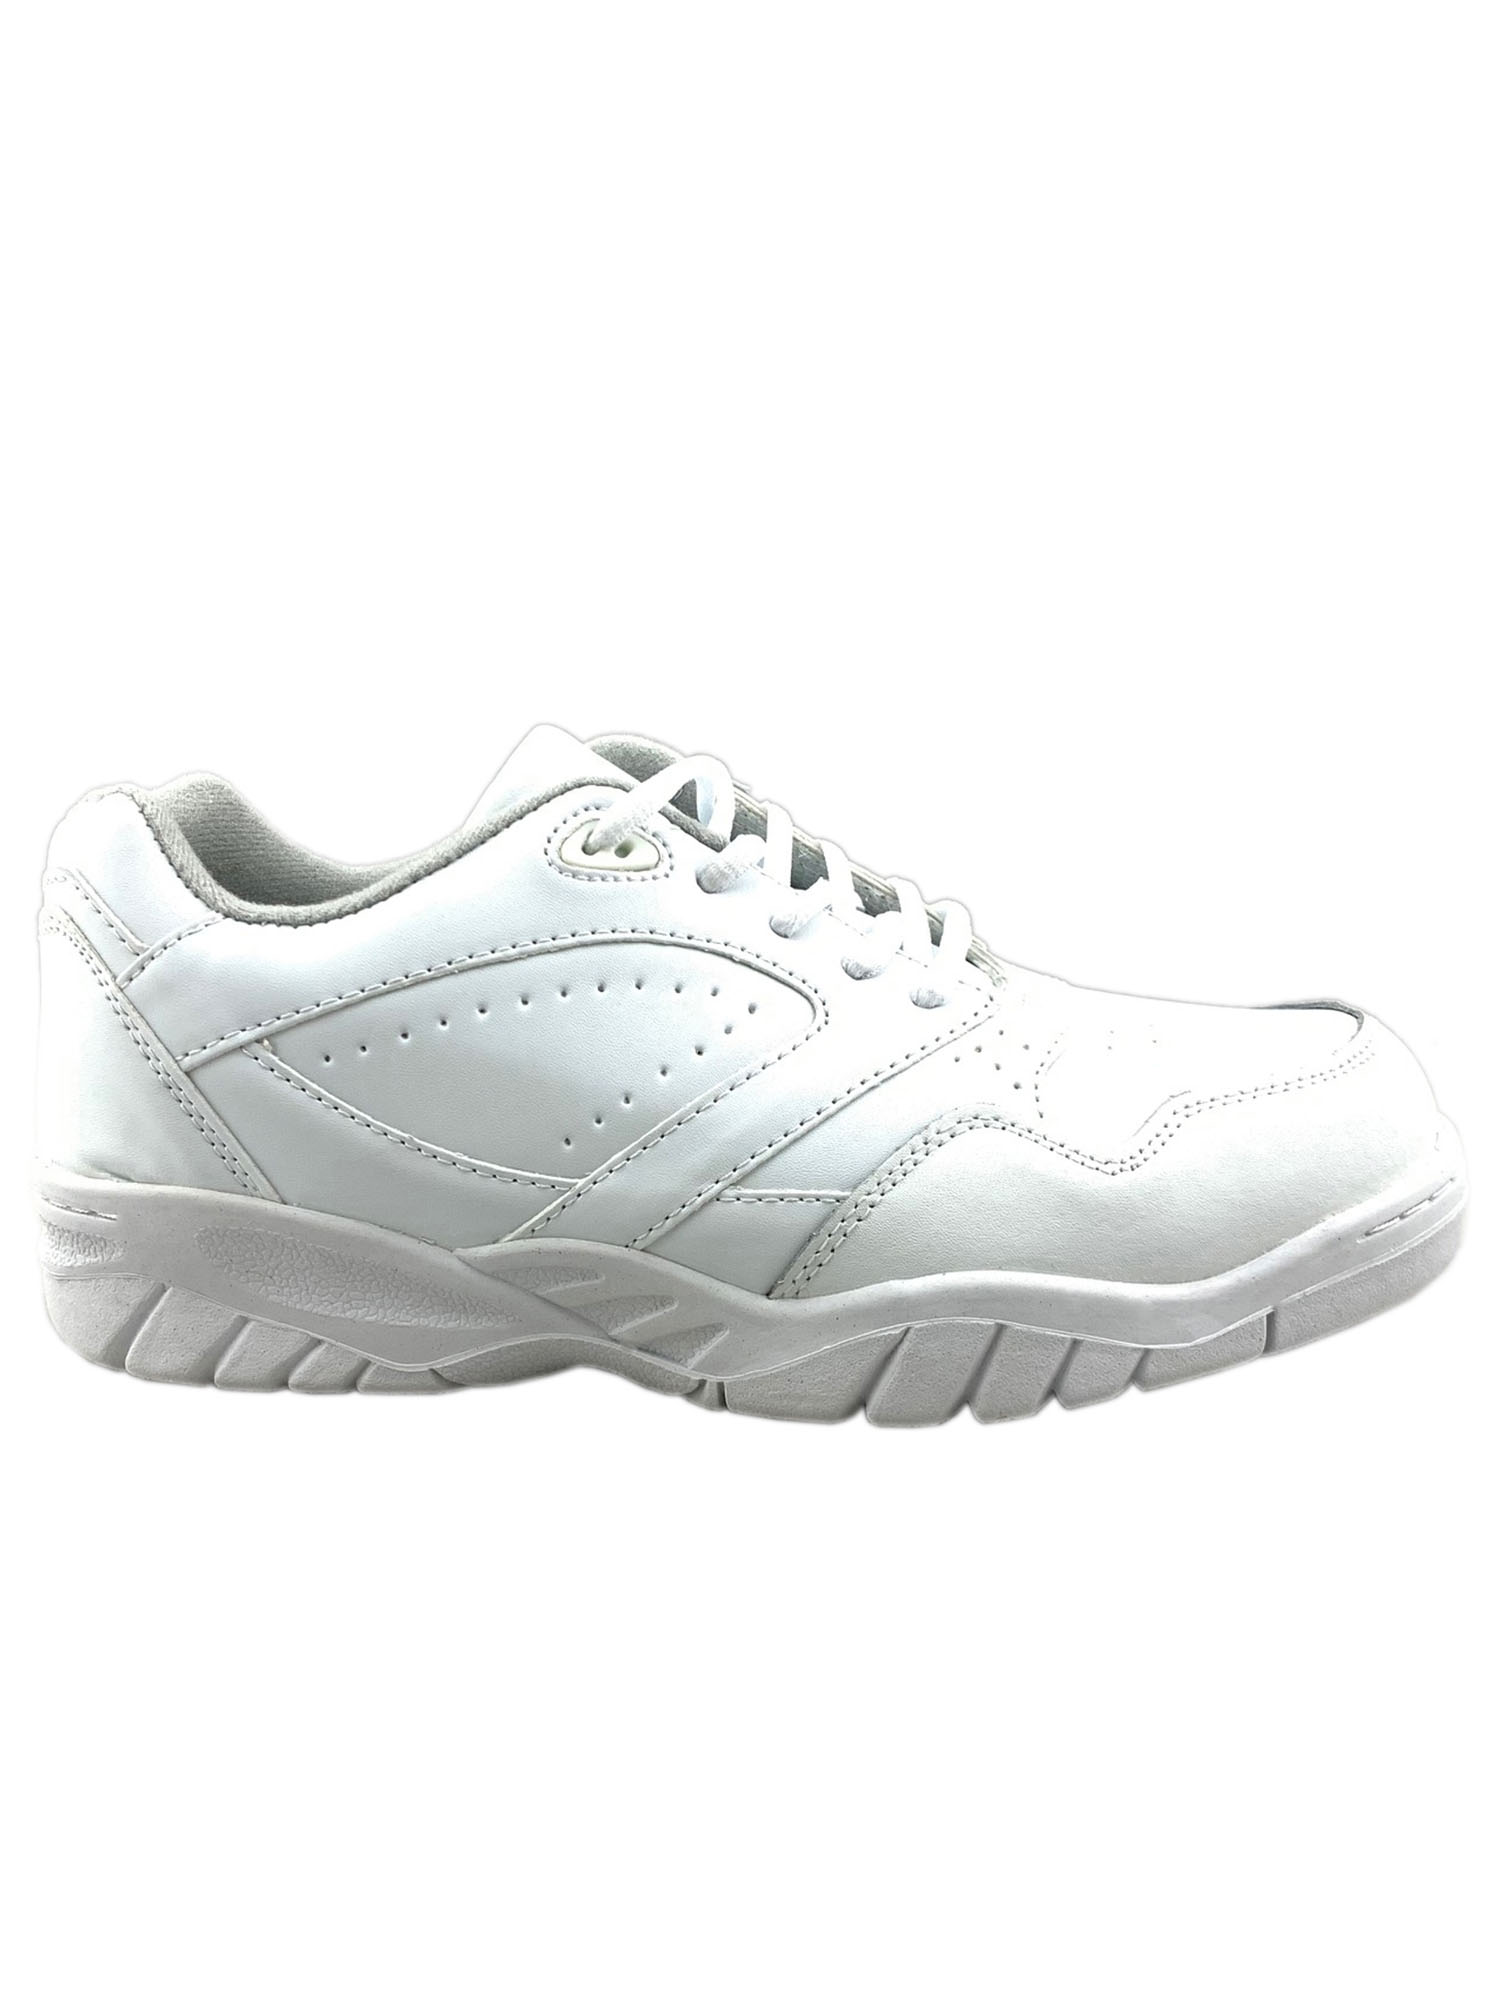 Tanleewa Men's Leather White Sports Shoes Lightweight Sneakers Breathable Casual Shoe Size 12 - image 1 of 5